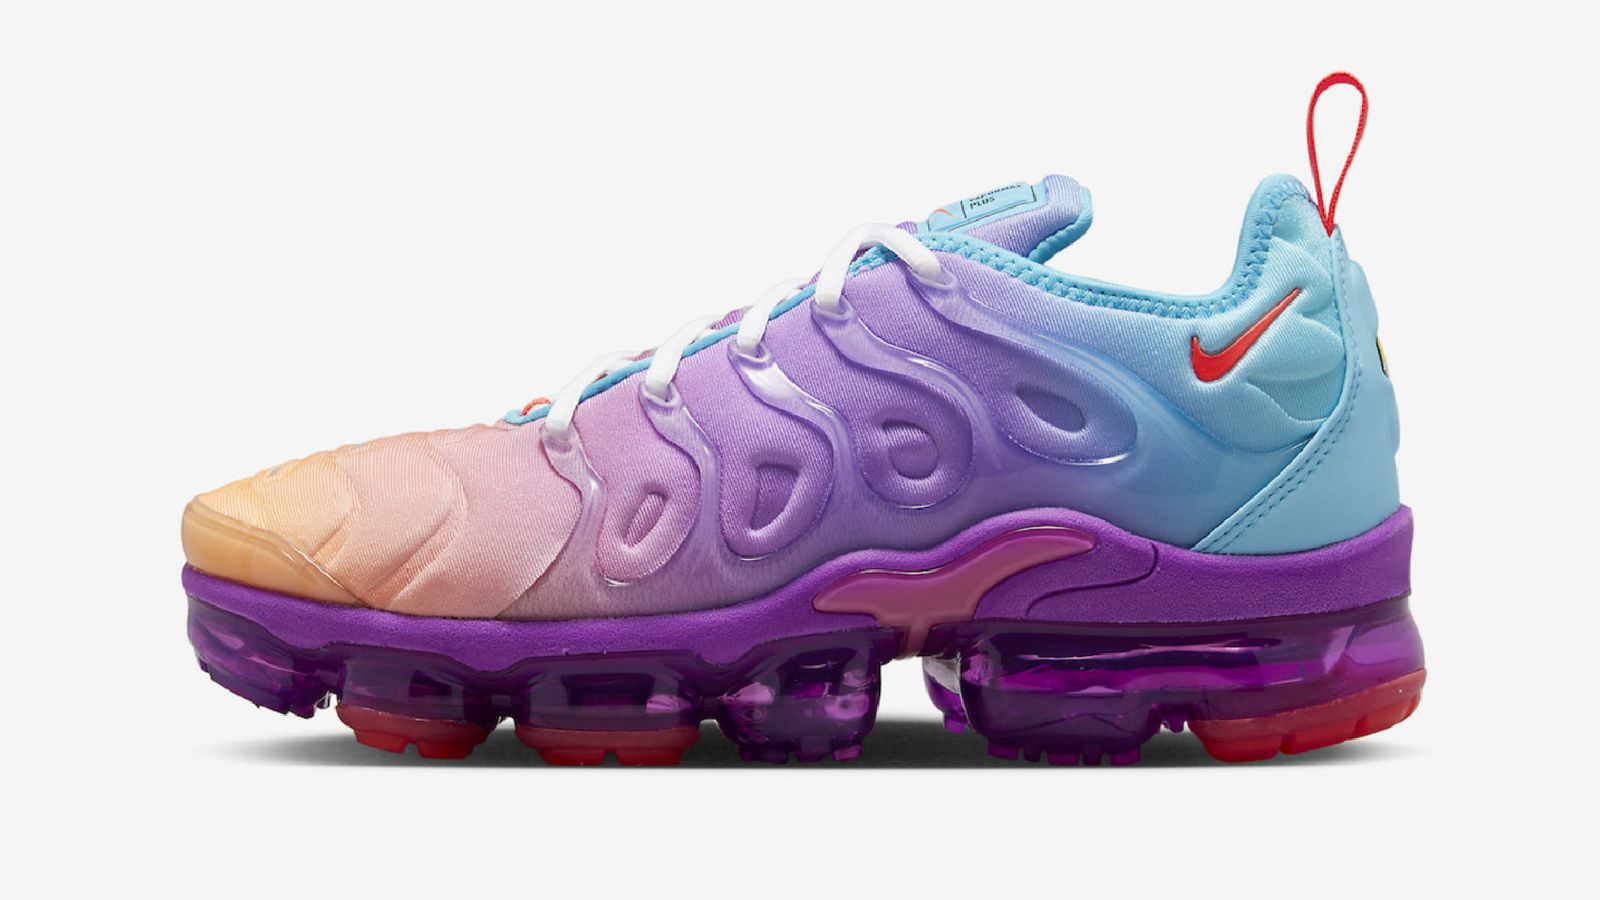 Nike Air VaporMax Plus “Multigradient" product image of a blue, orange, and purple Air Max featuring a darker purple sole.